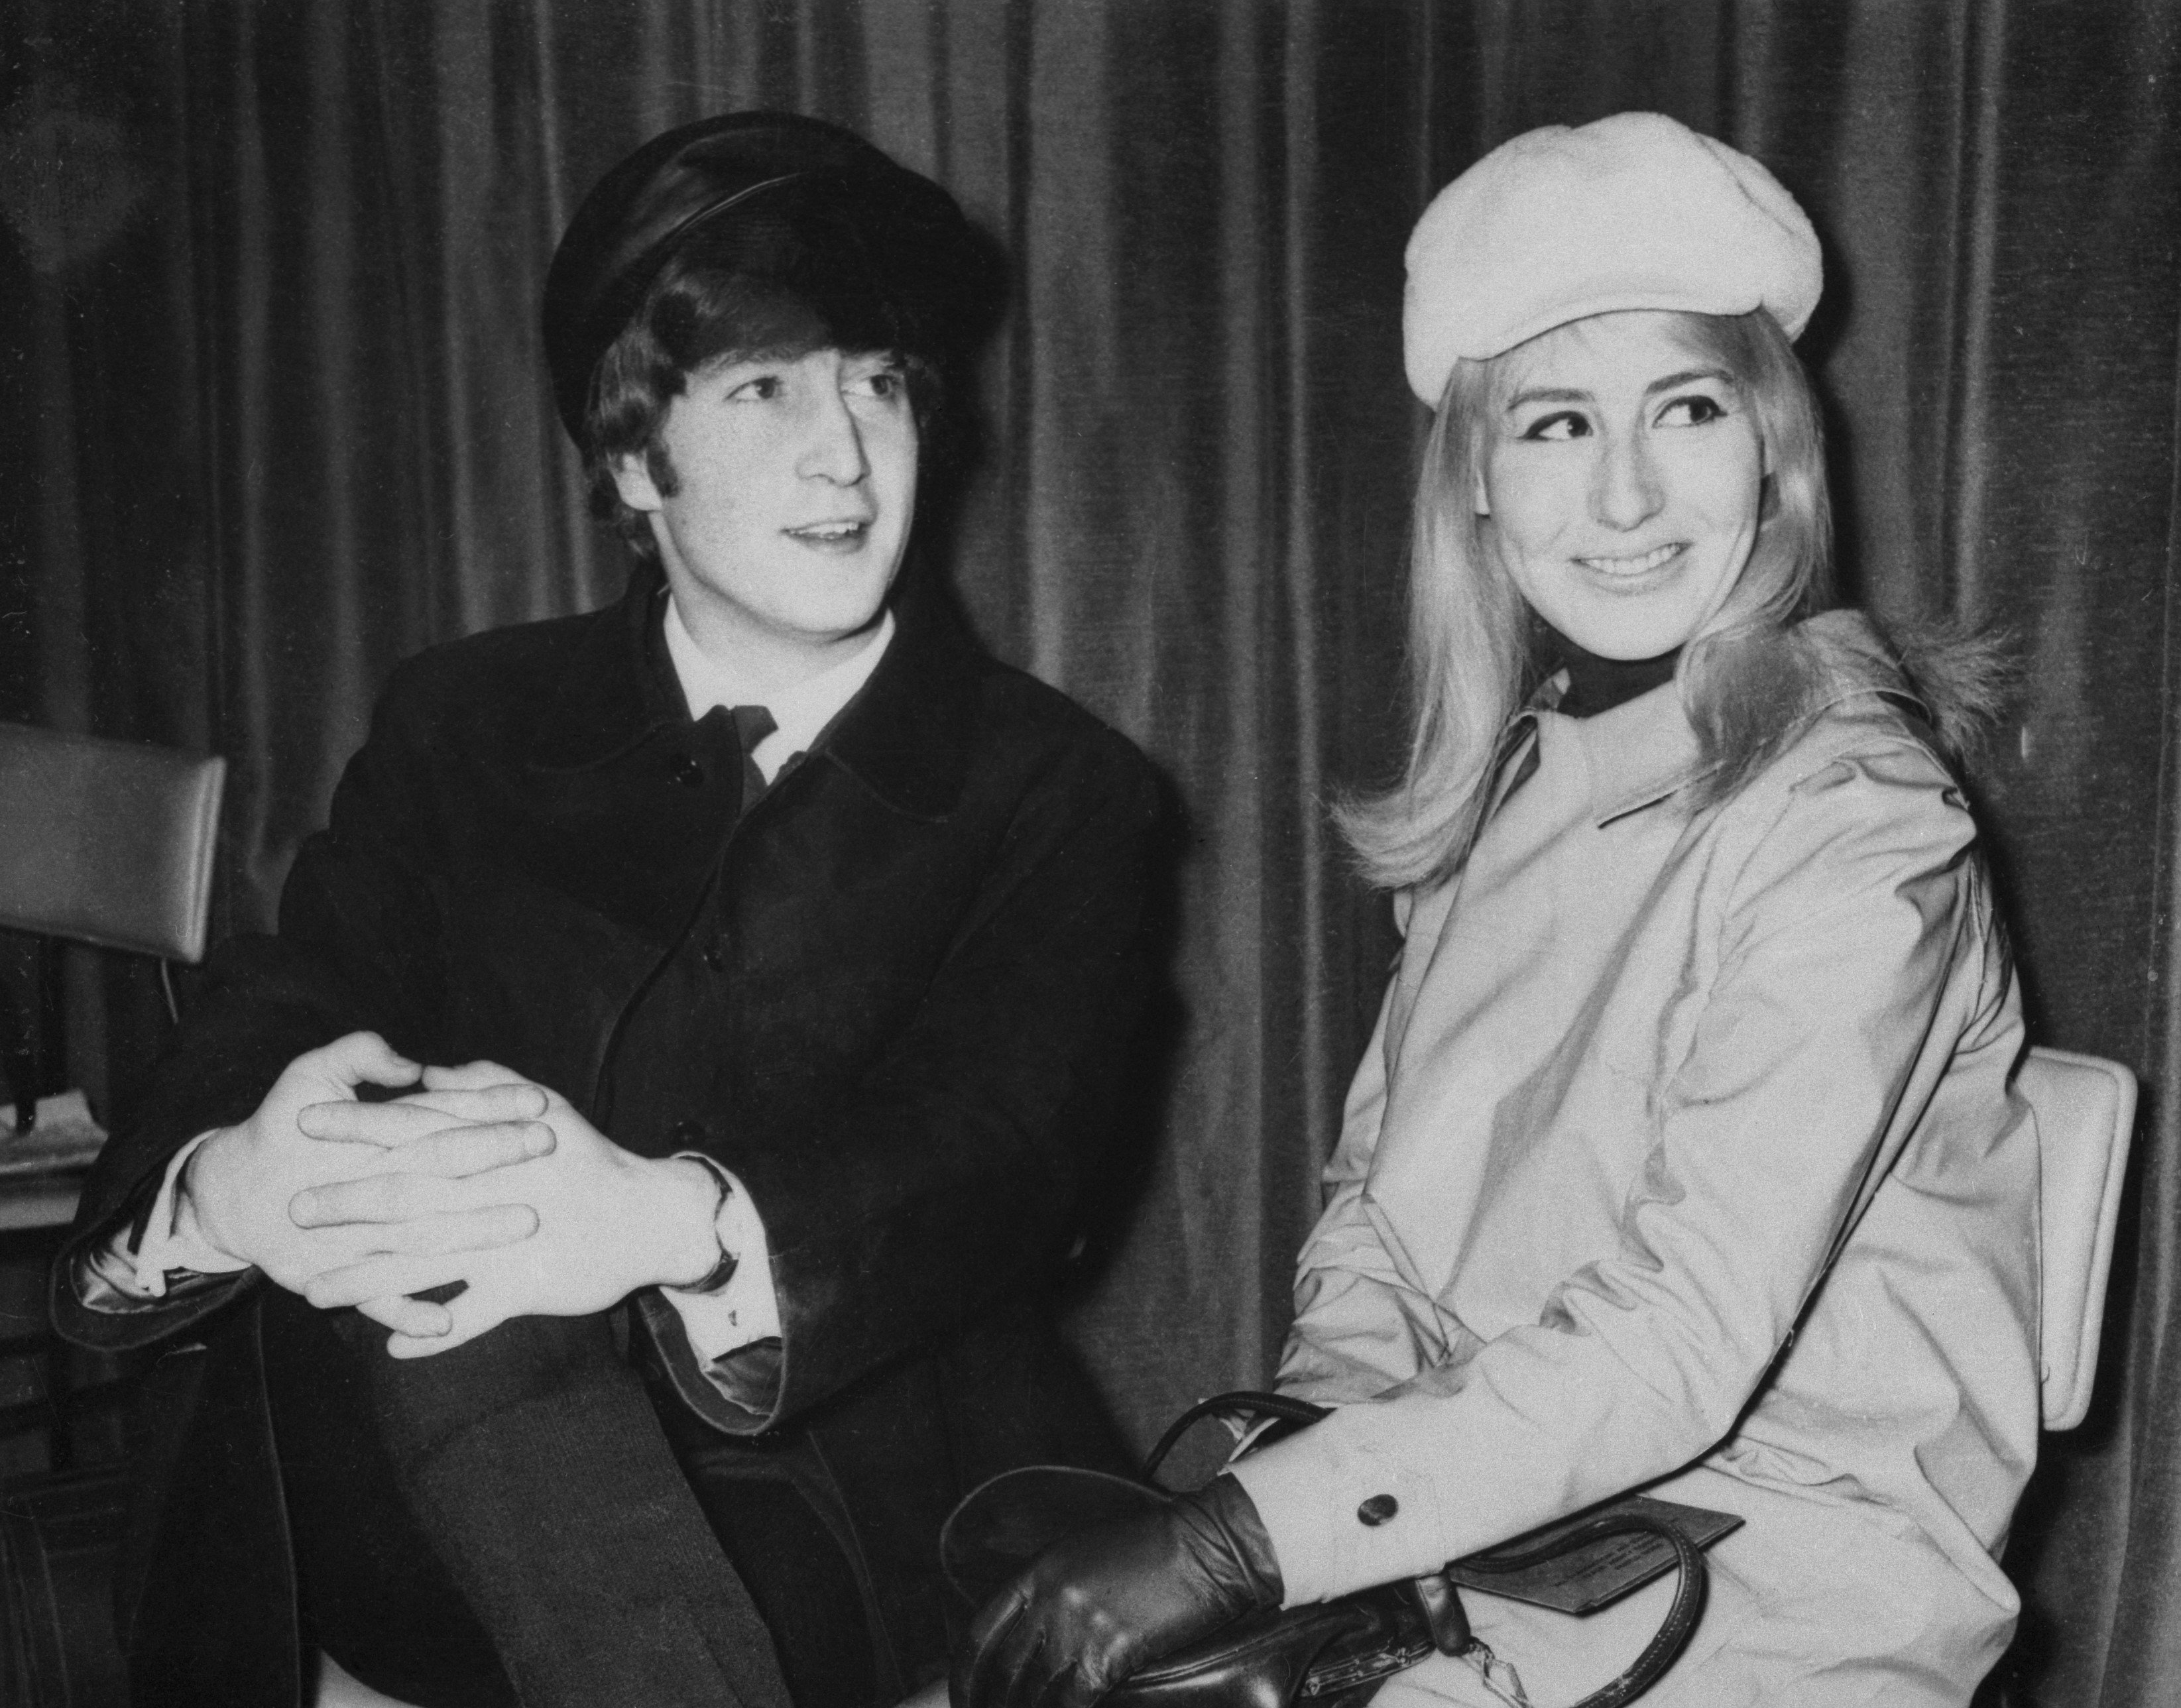 A black and white picture of John Lennon and his wife Cynthia Lennon wearing coats and hats and sitting in chairs.